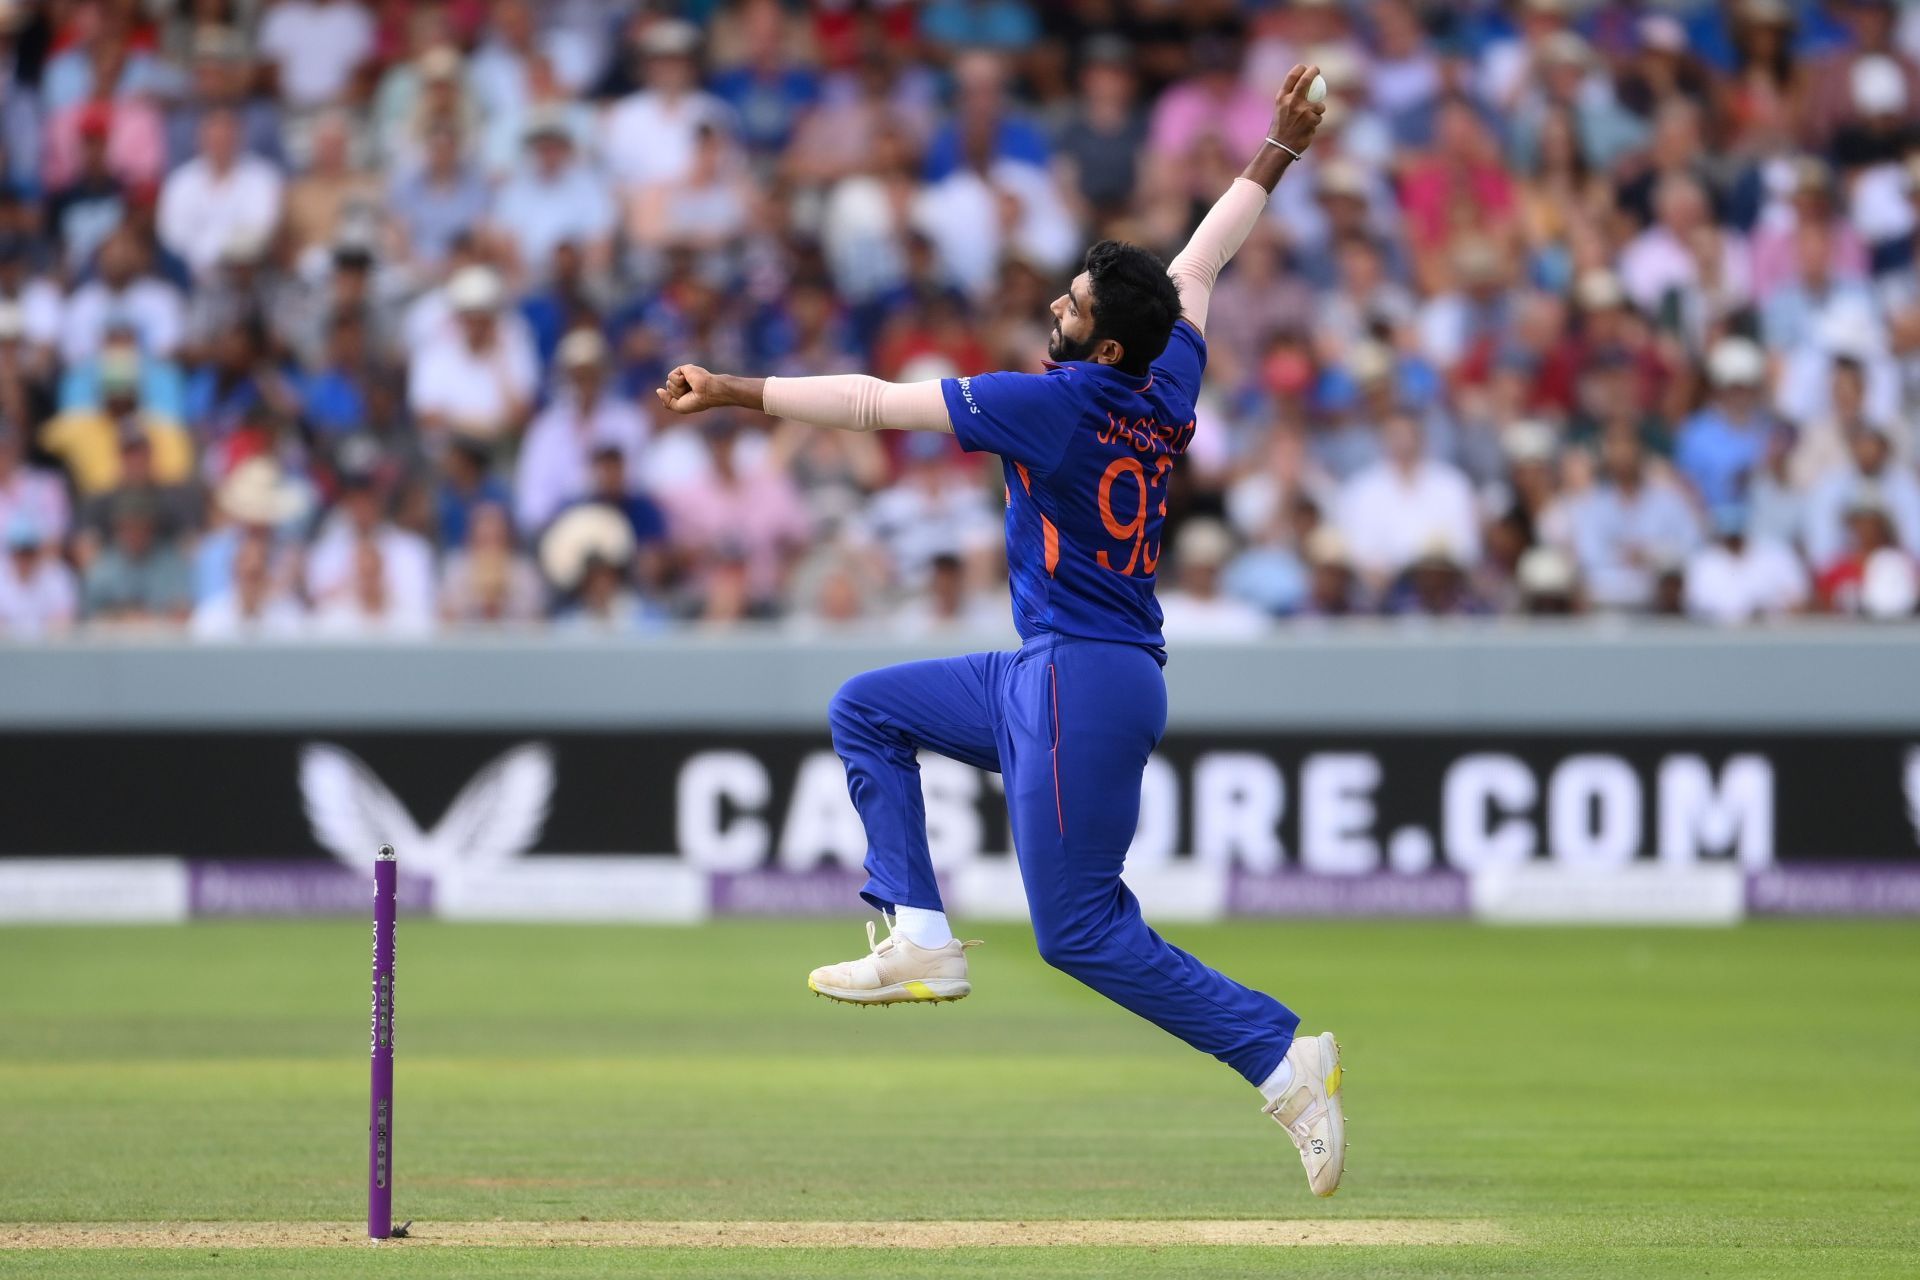 Bumrah will be keen to set an early marker